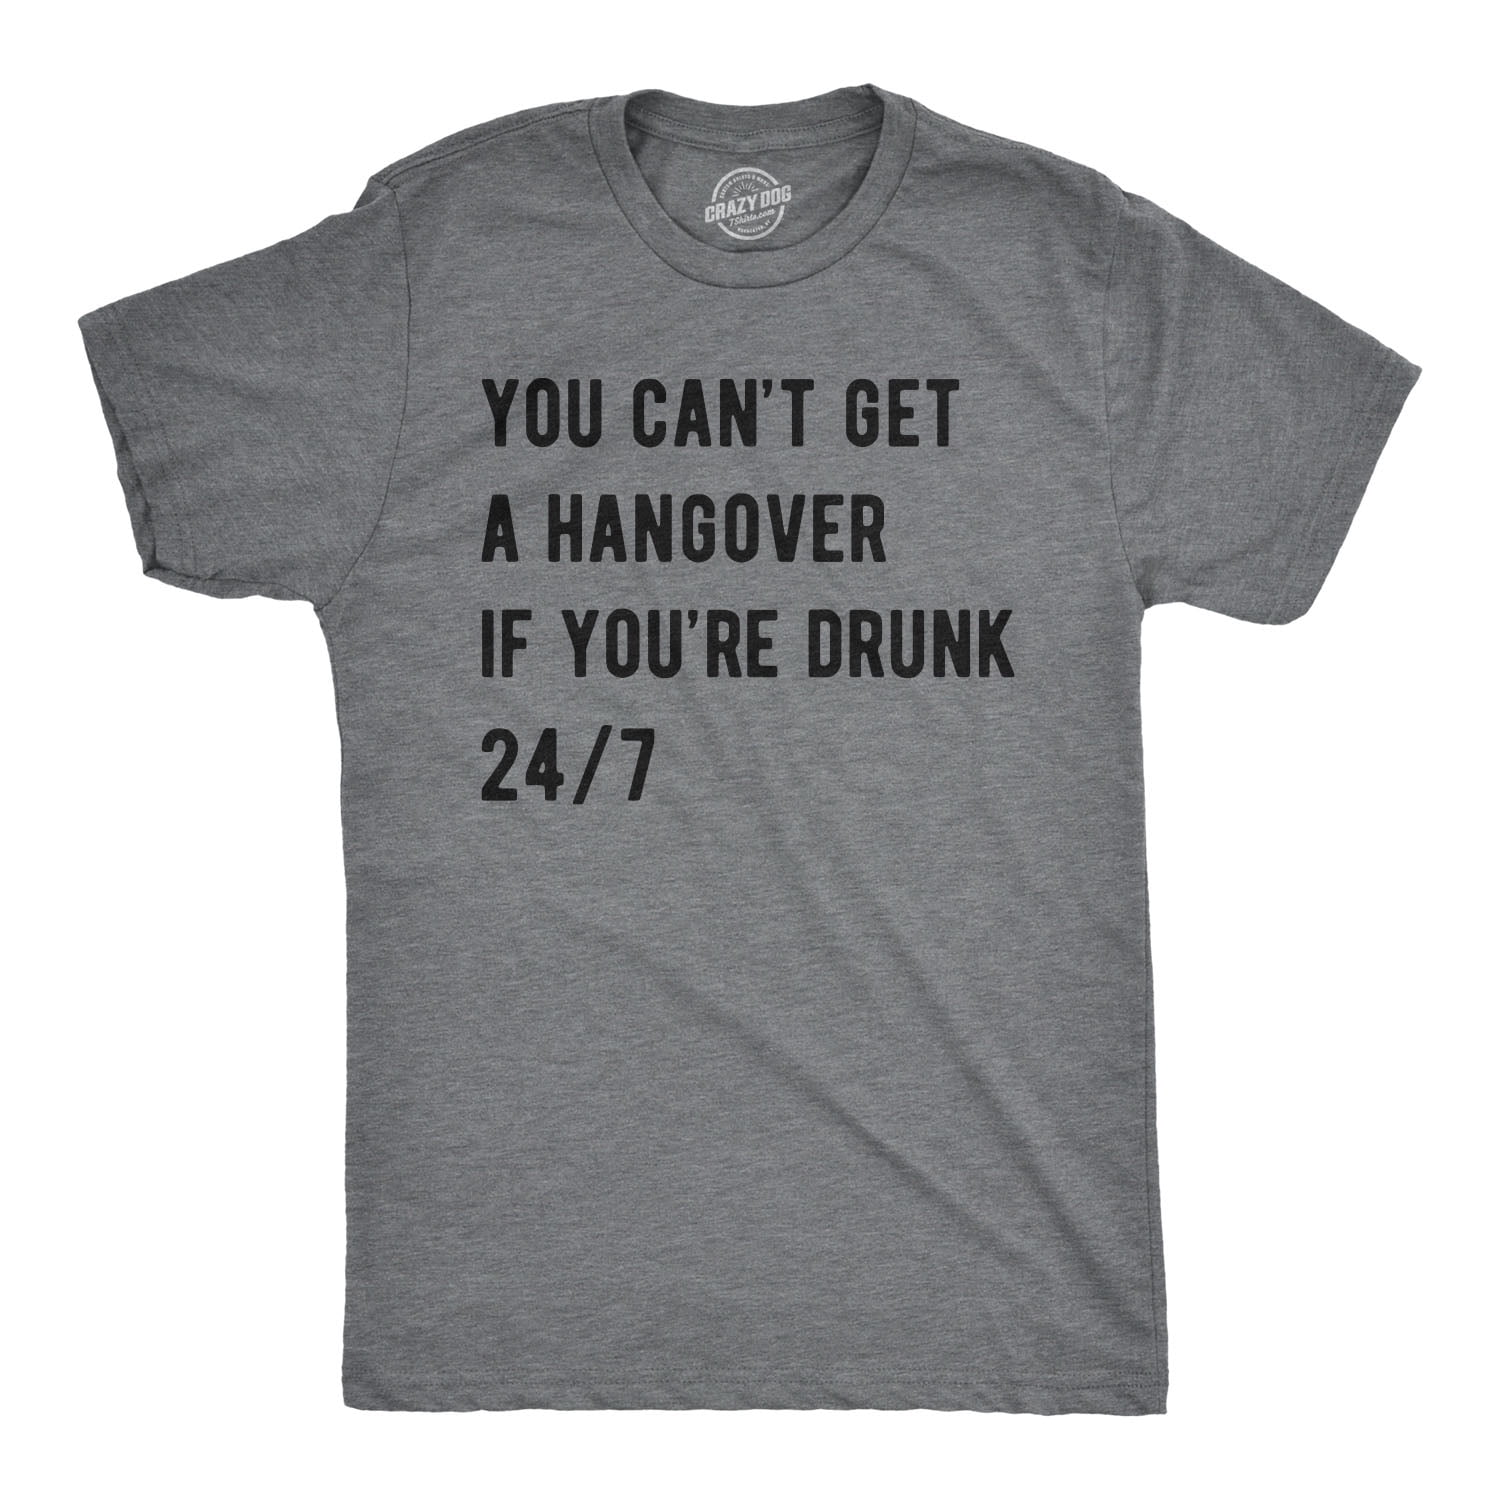 Hangover T Shirt Drinking Funny Drinking Apparel Gifts Zombie Hangover T-shirt Funny Hangover Shirt Party TShirt Hungover Shirt